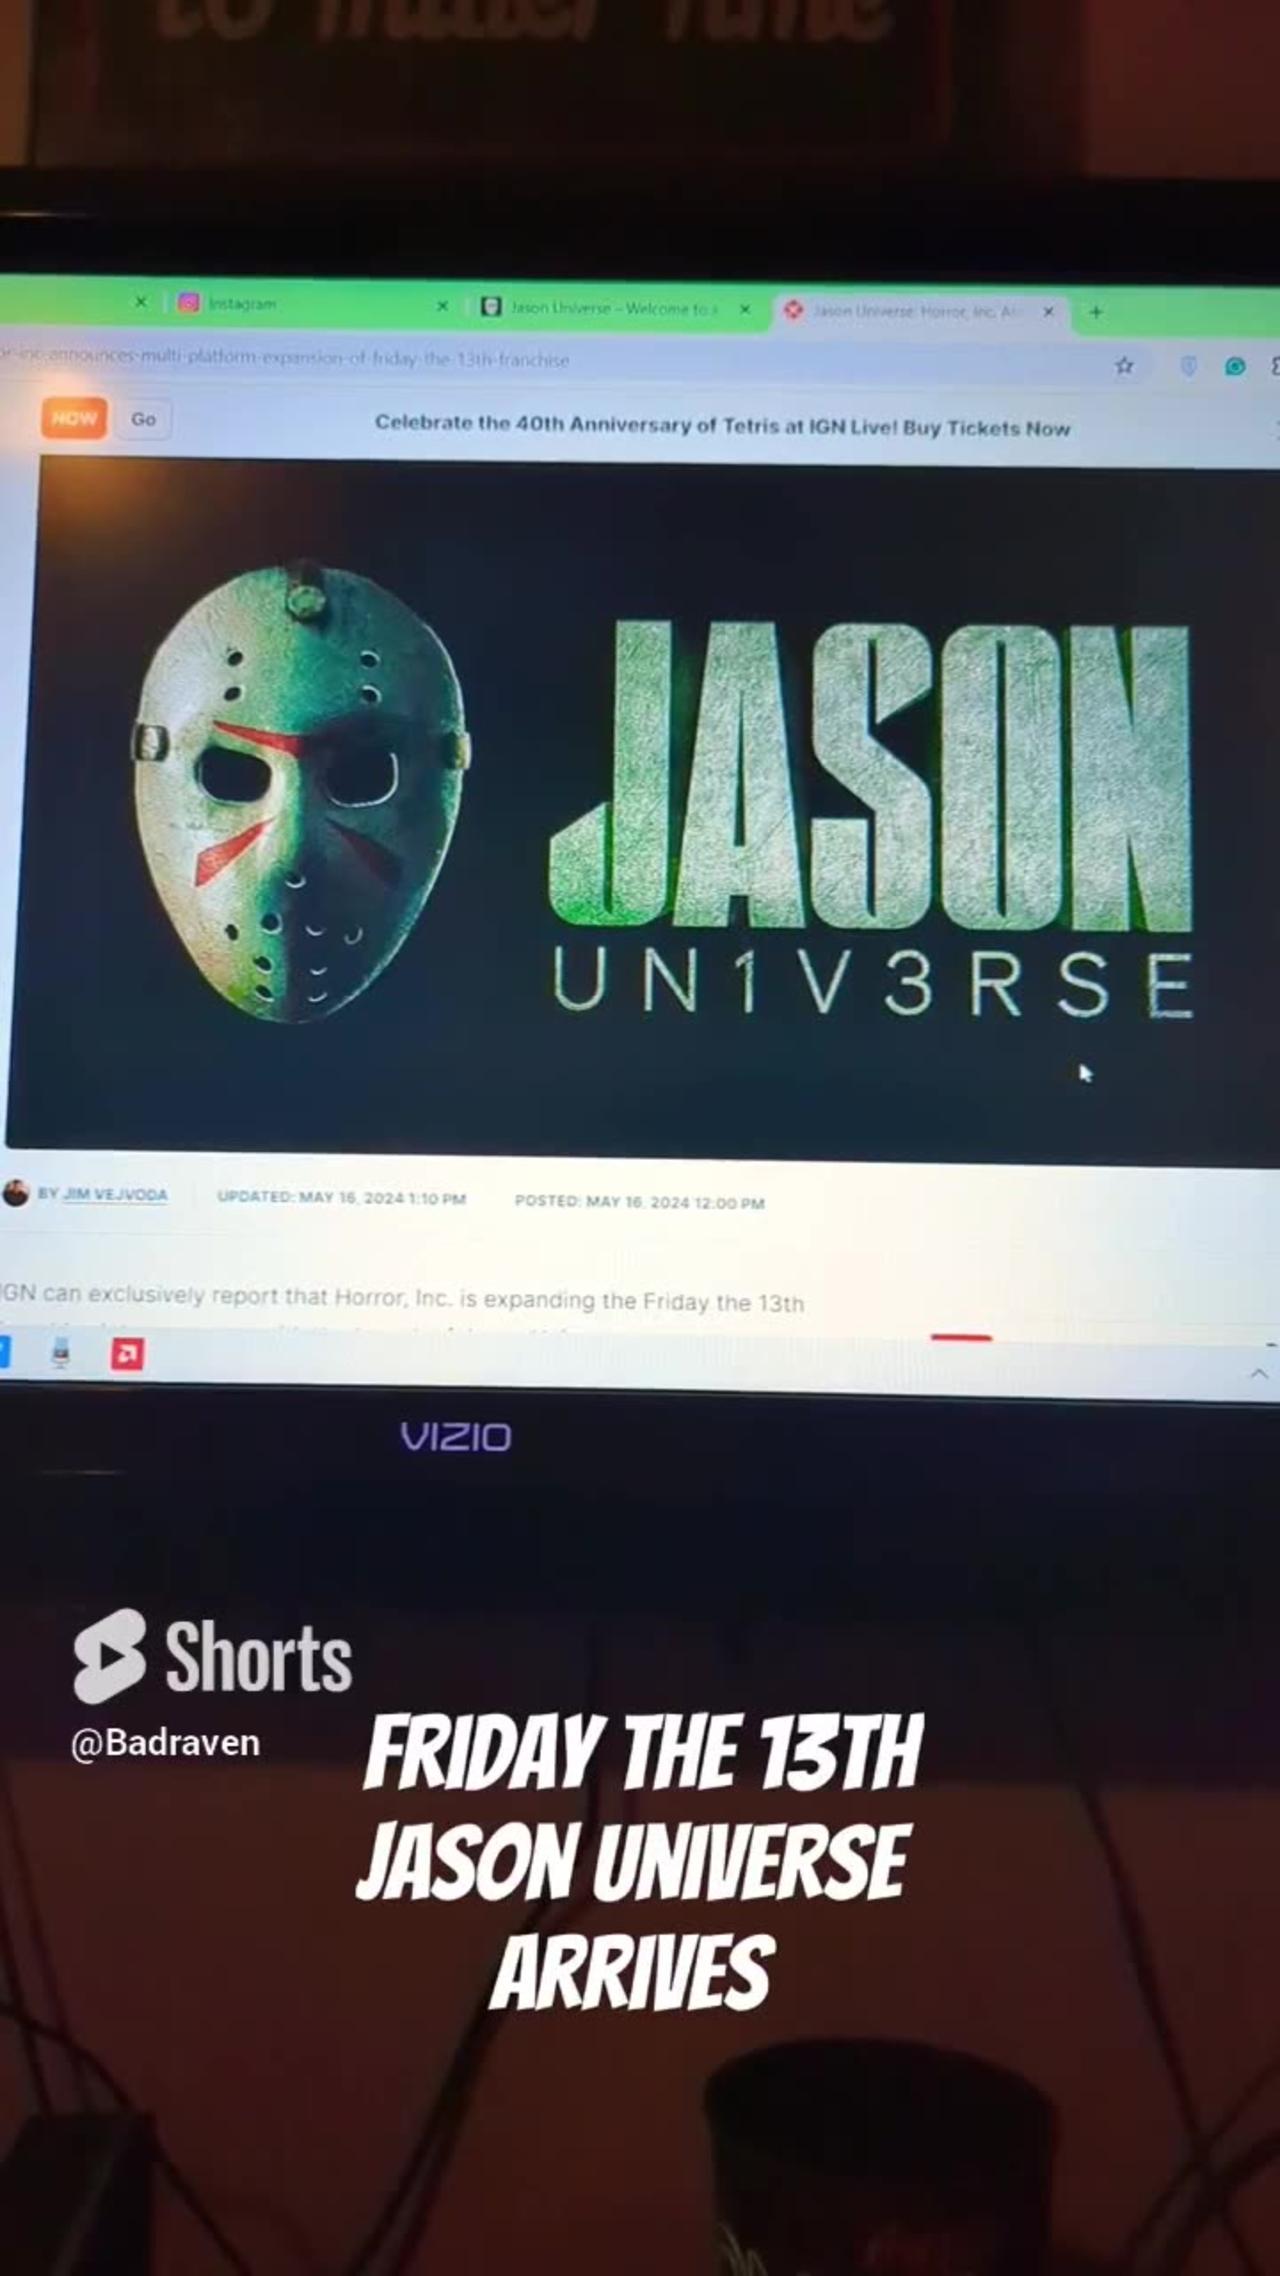 Friday the 13th Jason Universe Arrives